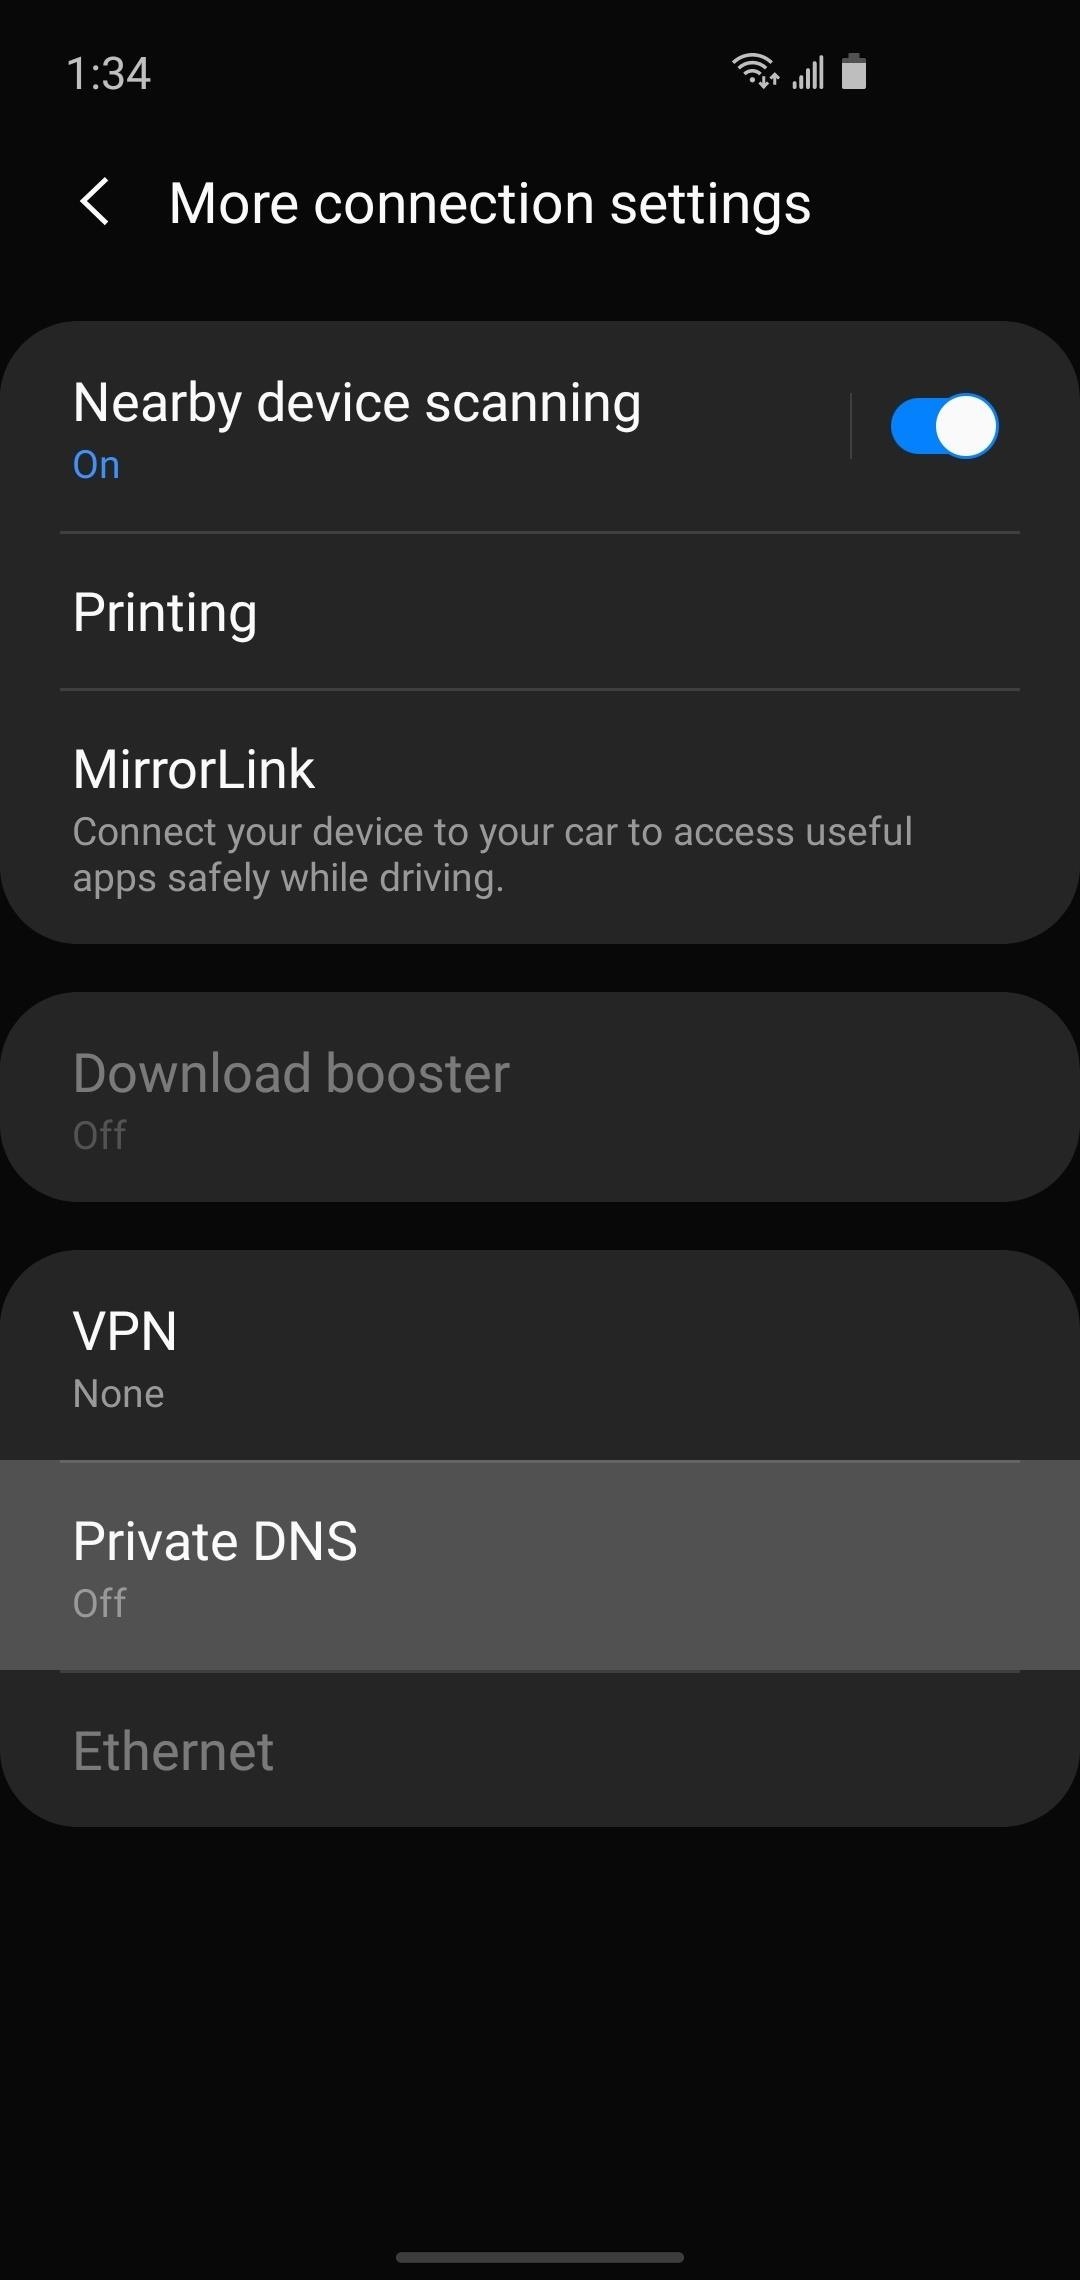 Here's Why You Should Be Using Private DNS on Your Phone